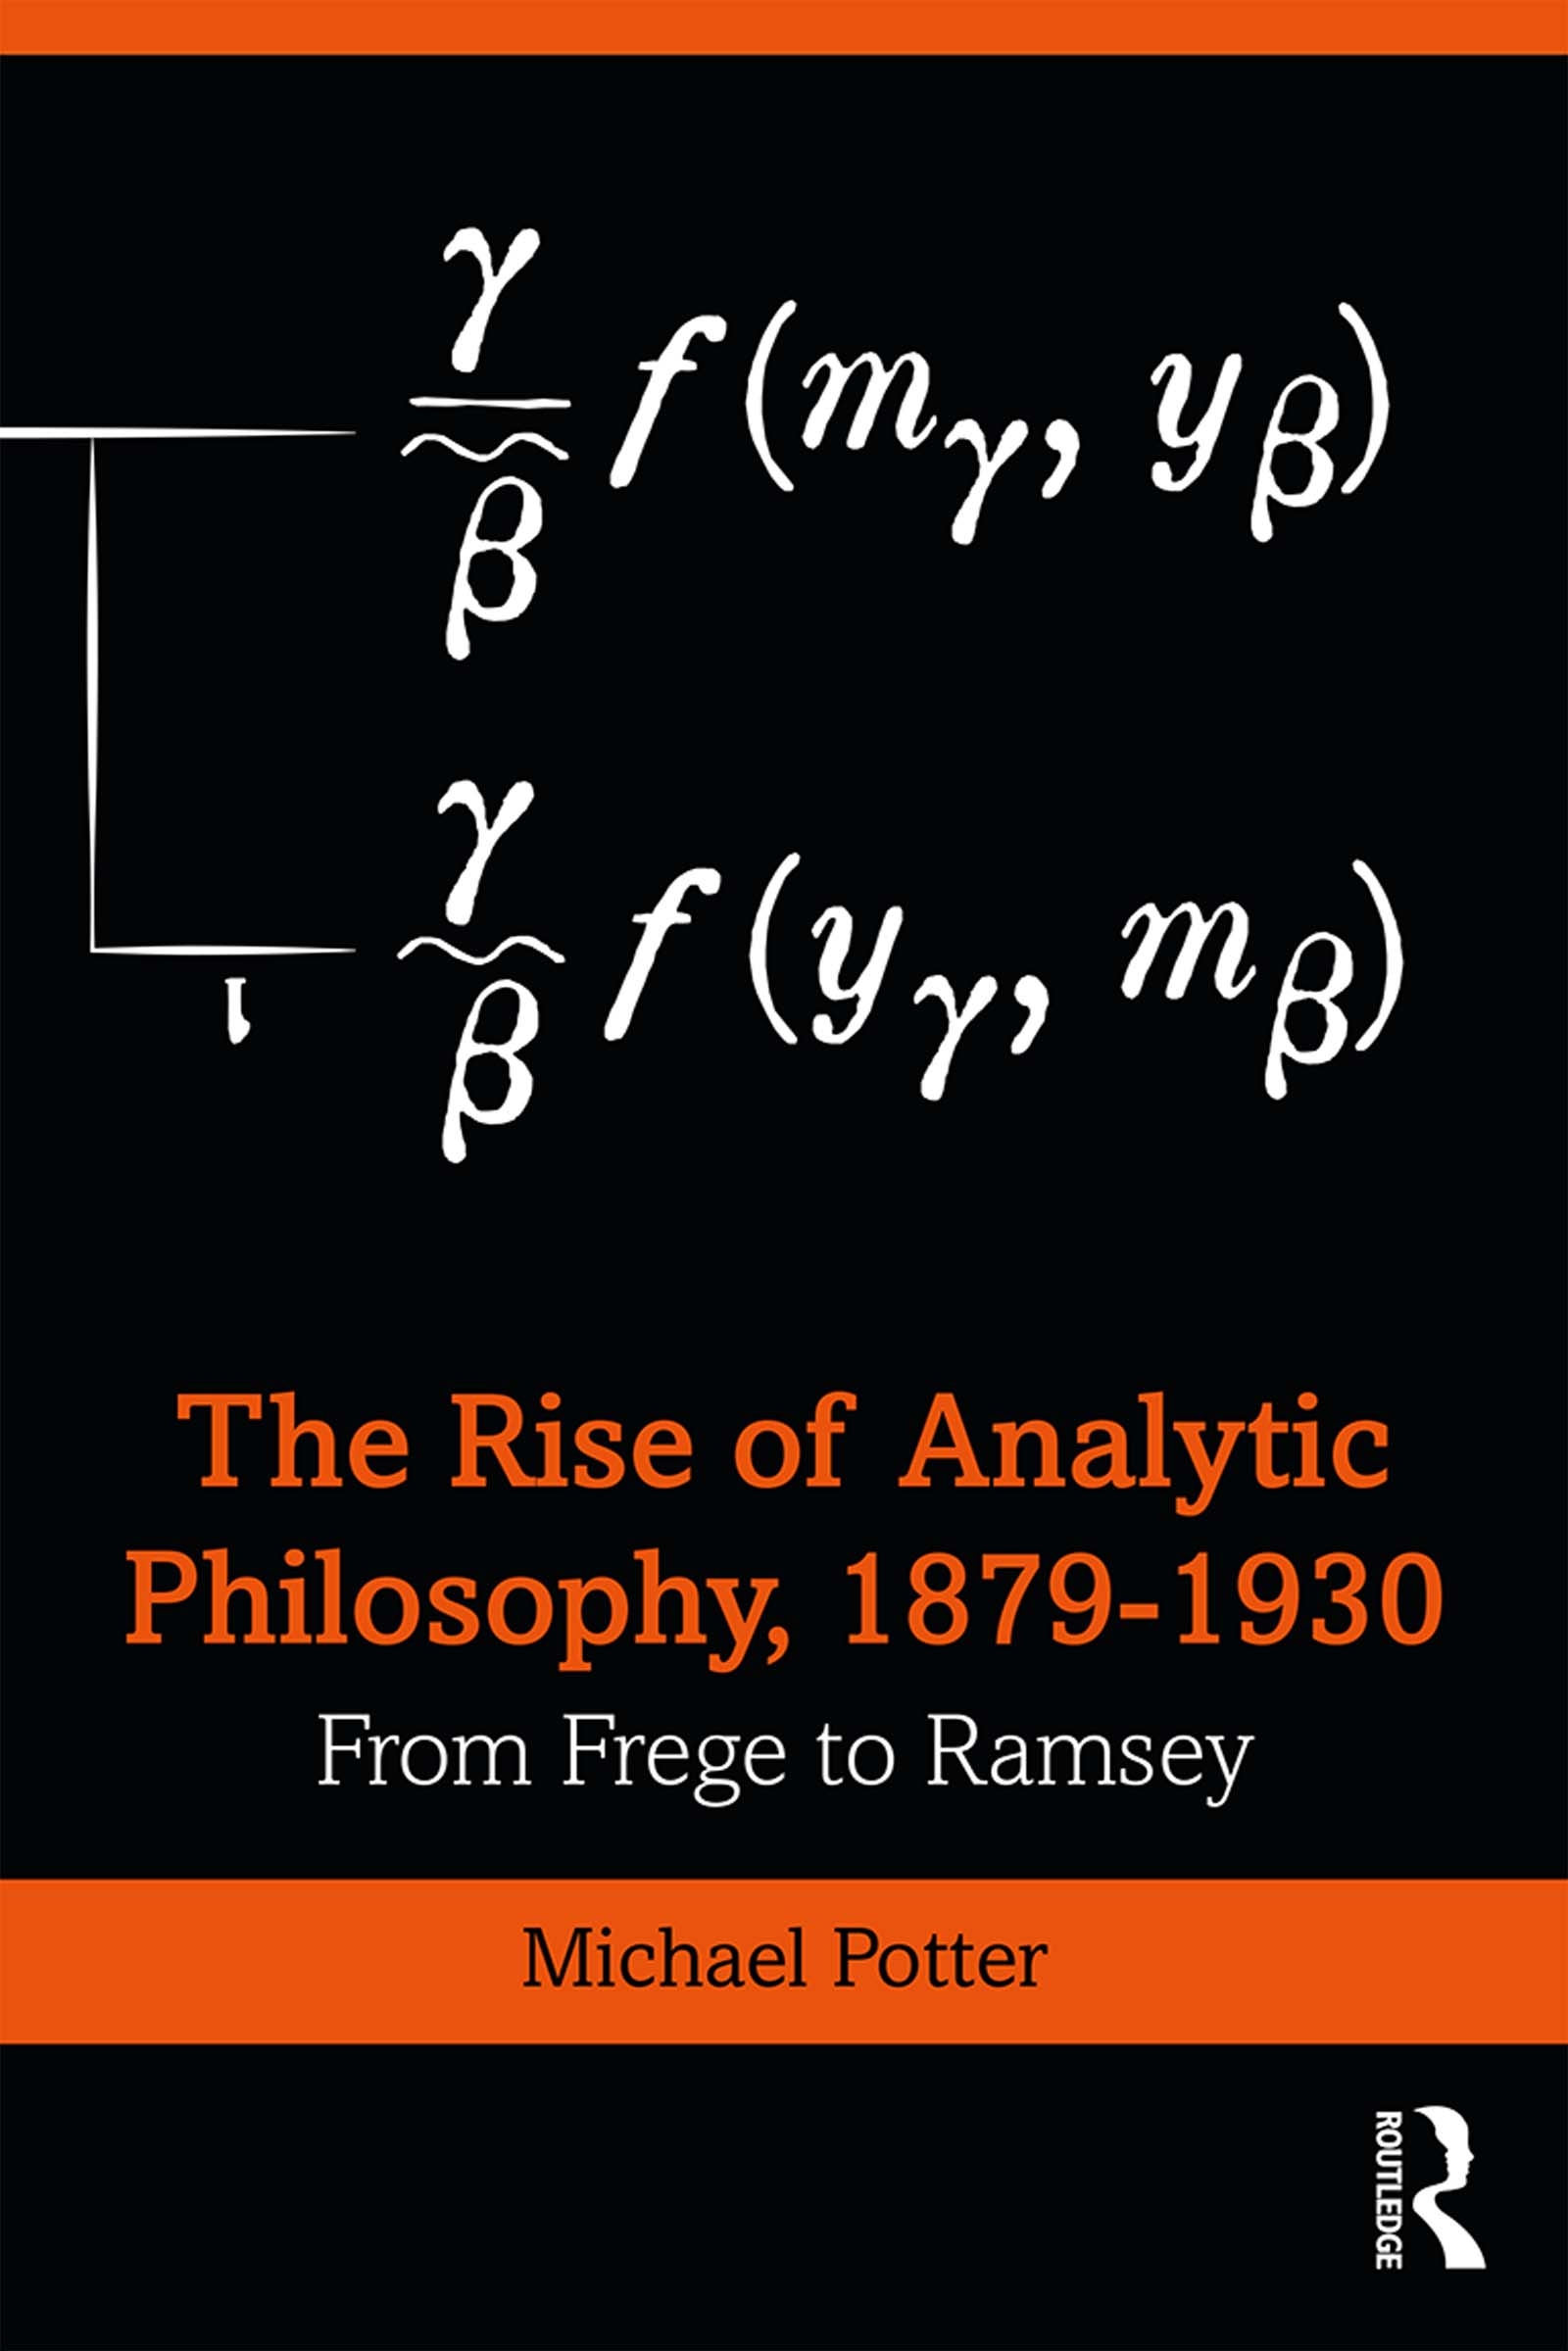 The Rise of Analytic Philosophy, 1879-1930: From Frege to Ramsey